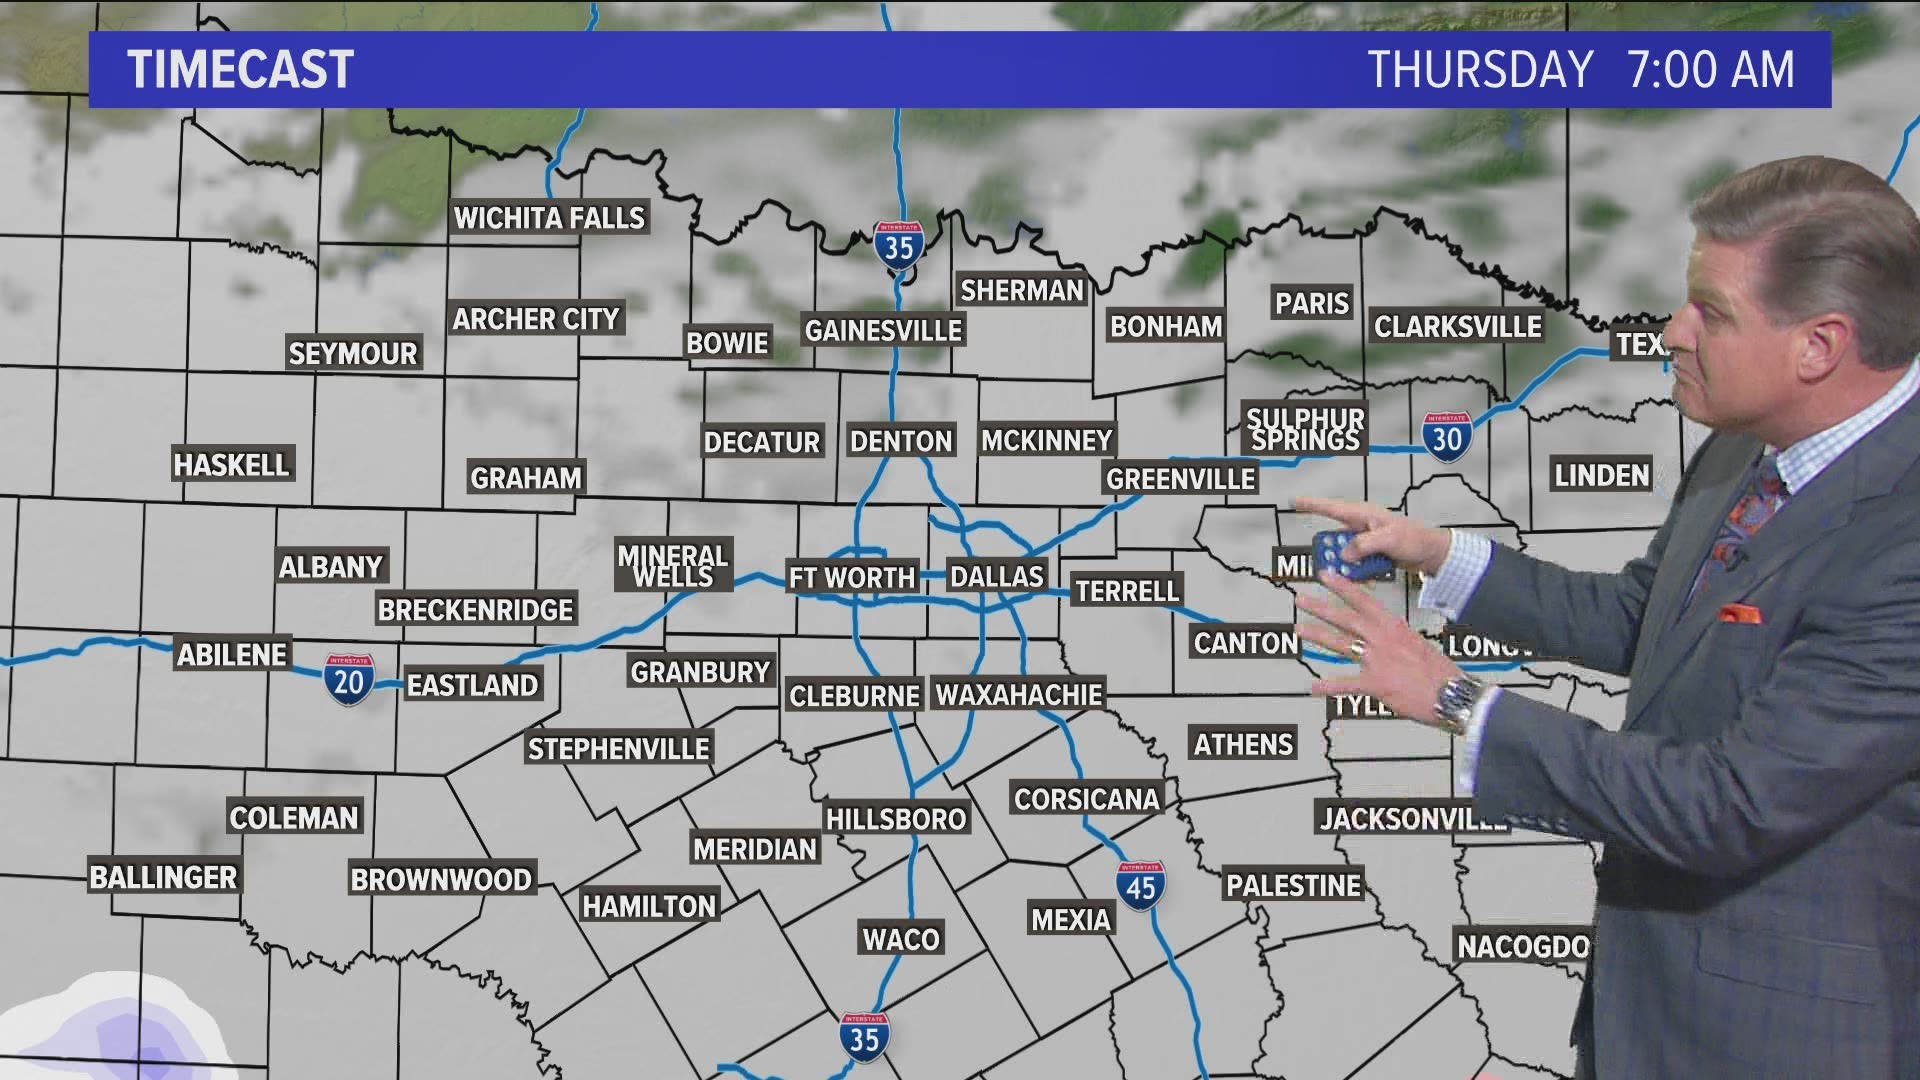 The latest on the forecast in North Texas from WFAA Chief Meteorologist Pete Delkus on Feb. 16, 2021 at 10 p.m.